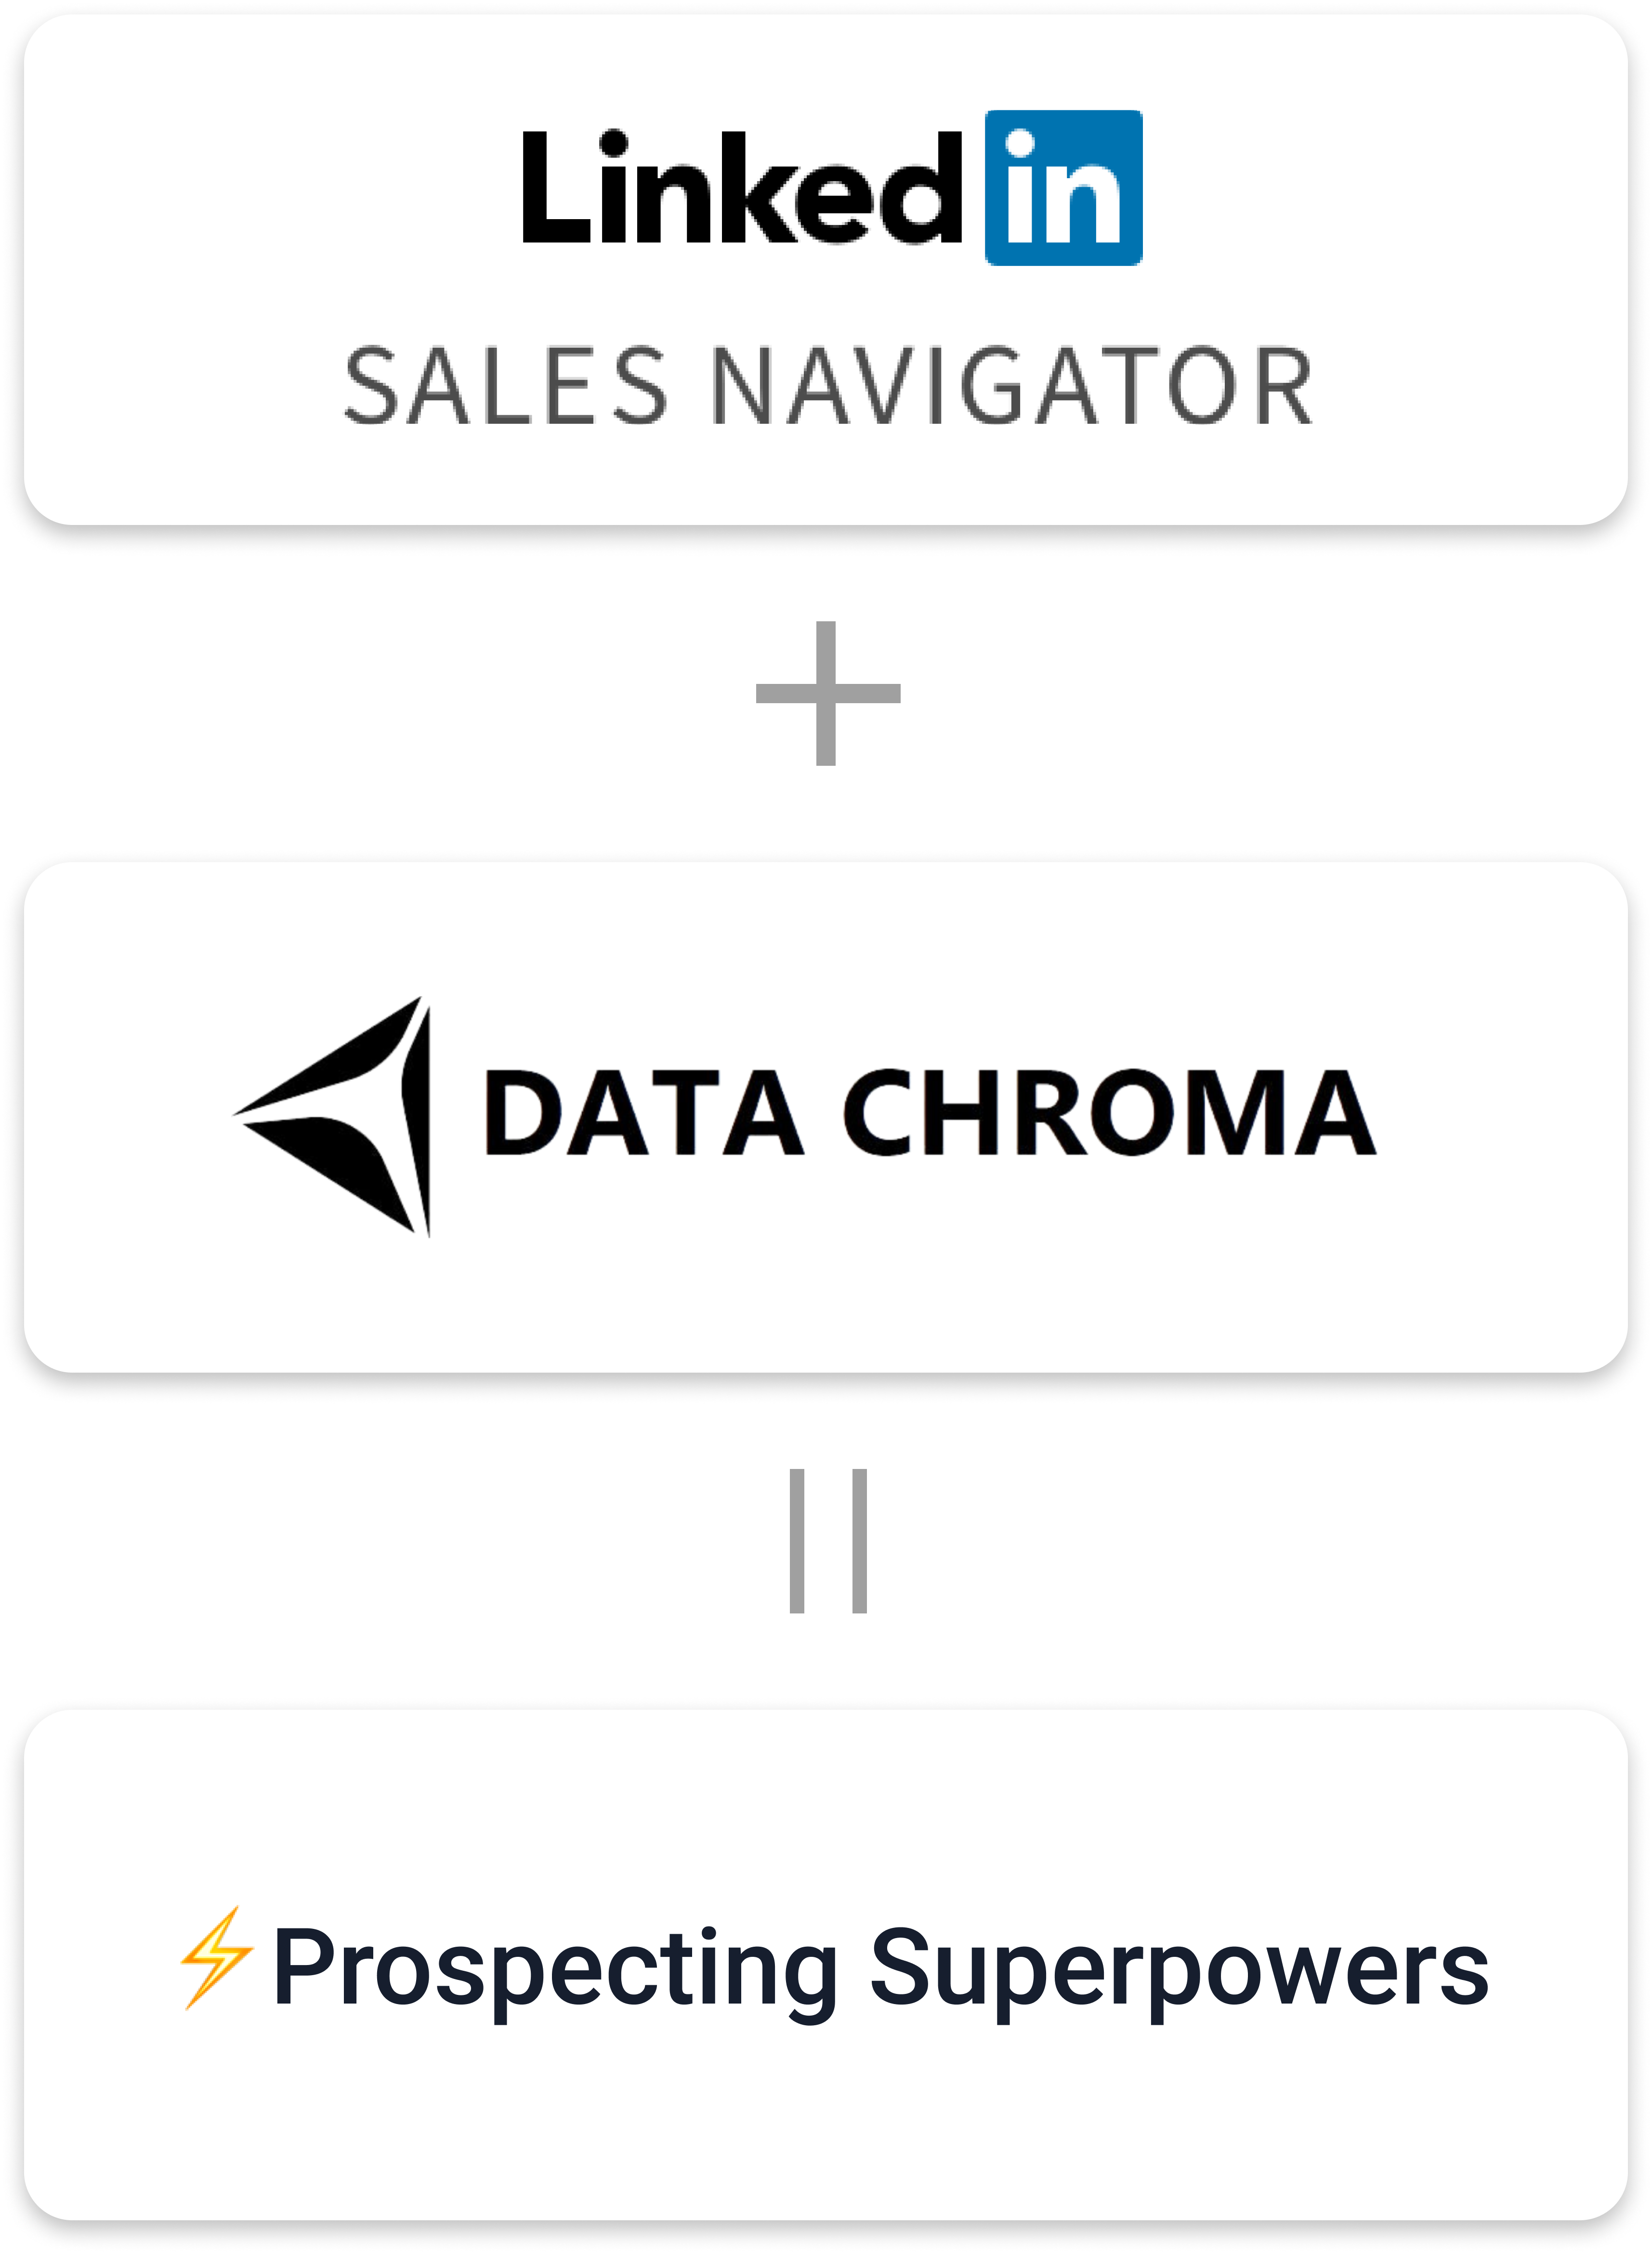 Supercharge Sales Navigator Prospecting with Data Chroma